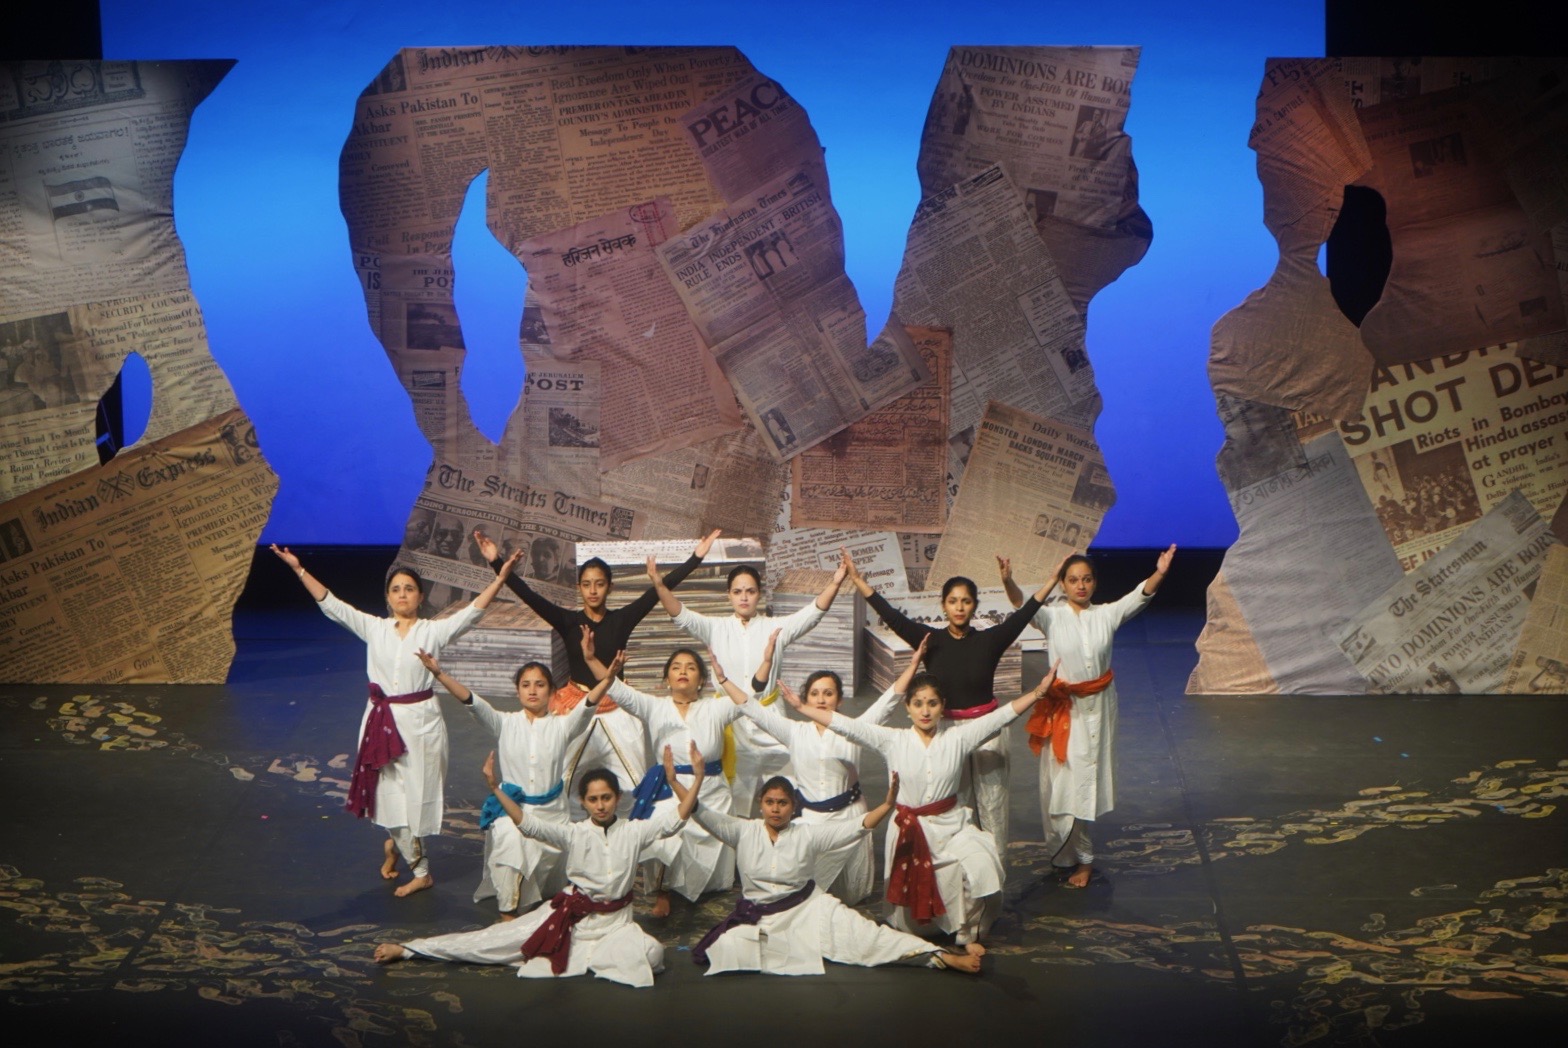 "Gandhi: The Musical" by Naatak runs September 14 - October 6 at Cubberley Theatre in Palo Alto.